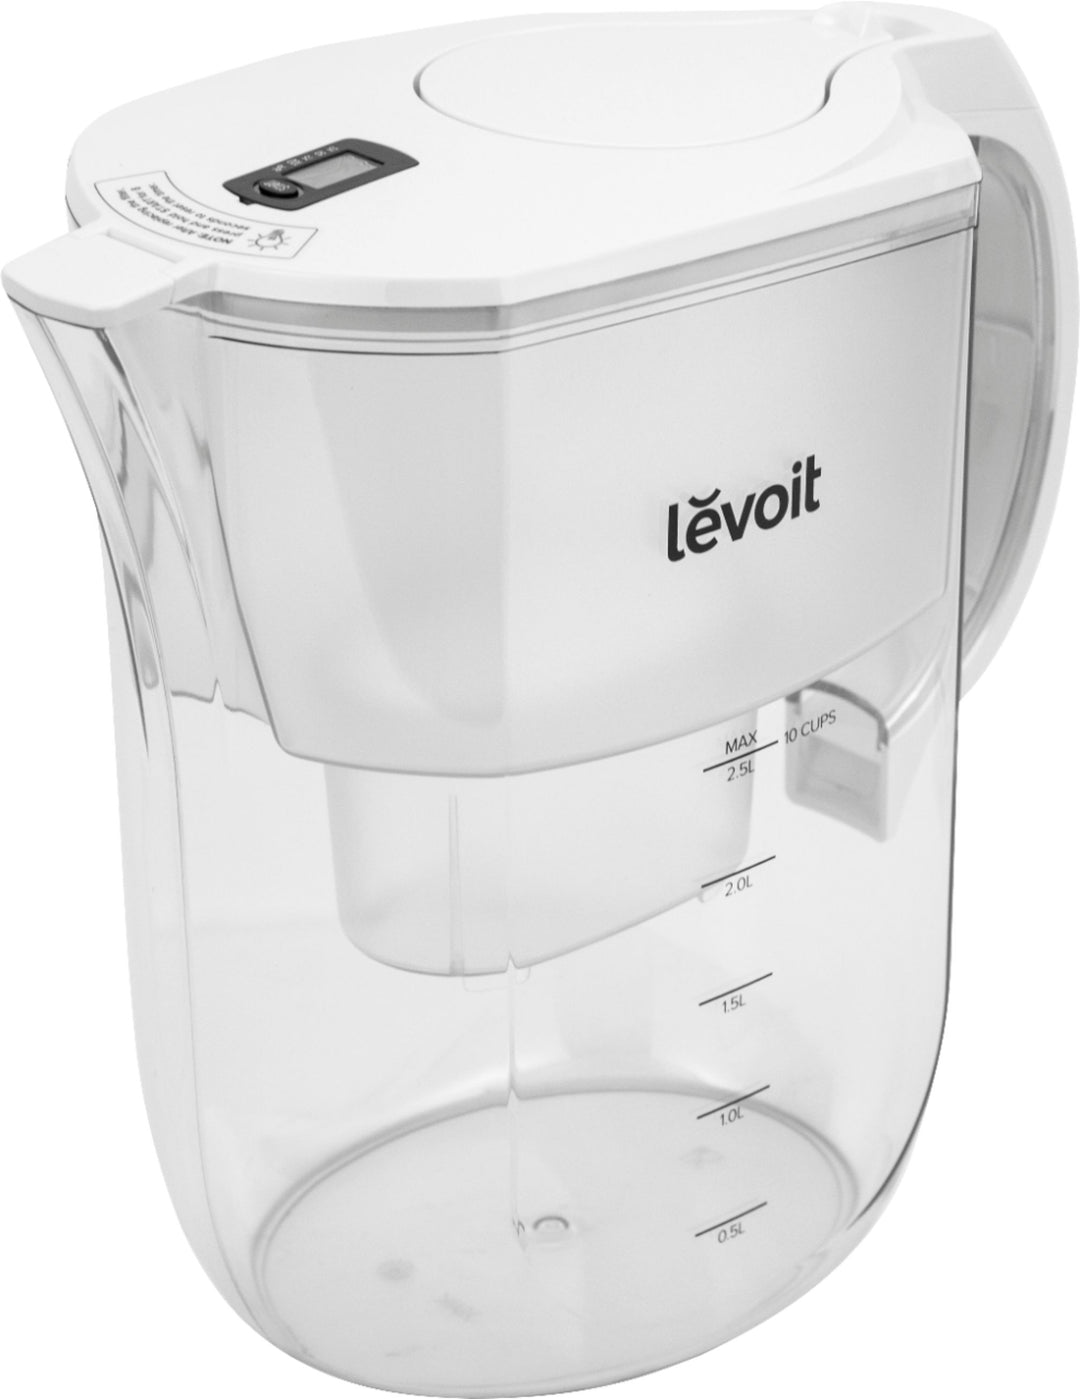 Levoit - Water Filter Pitcher - White_1